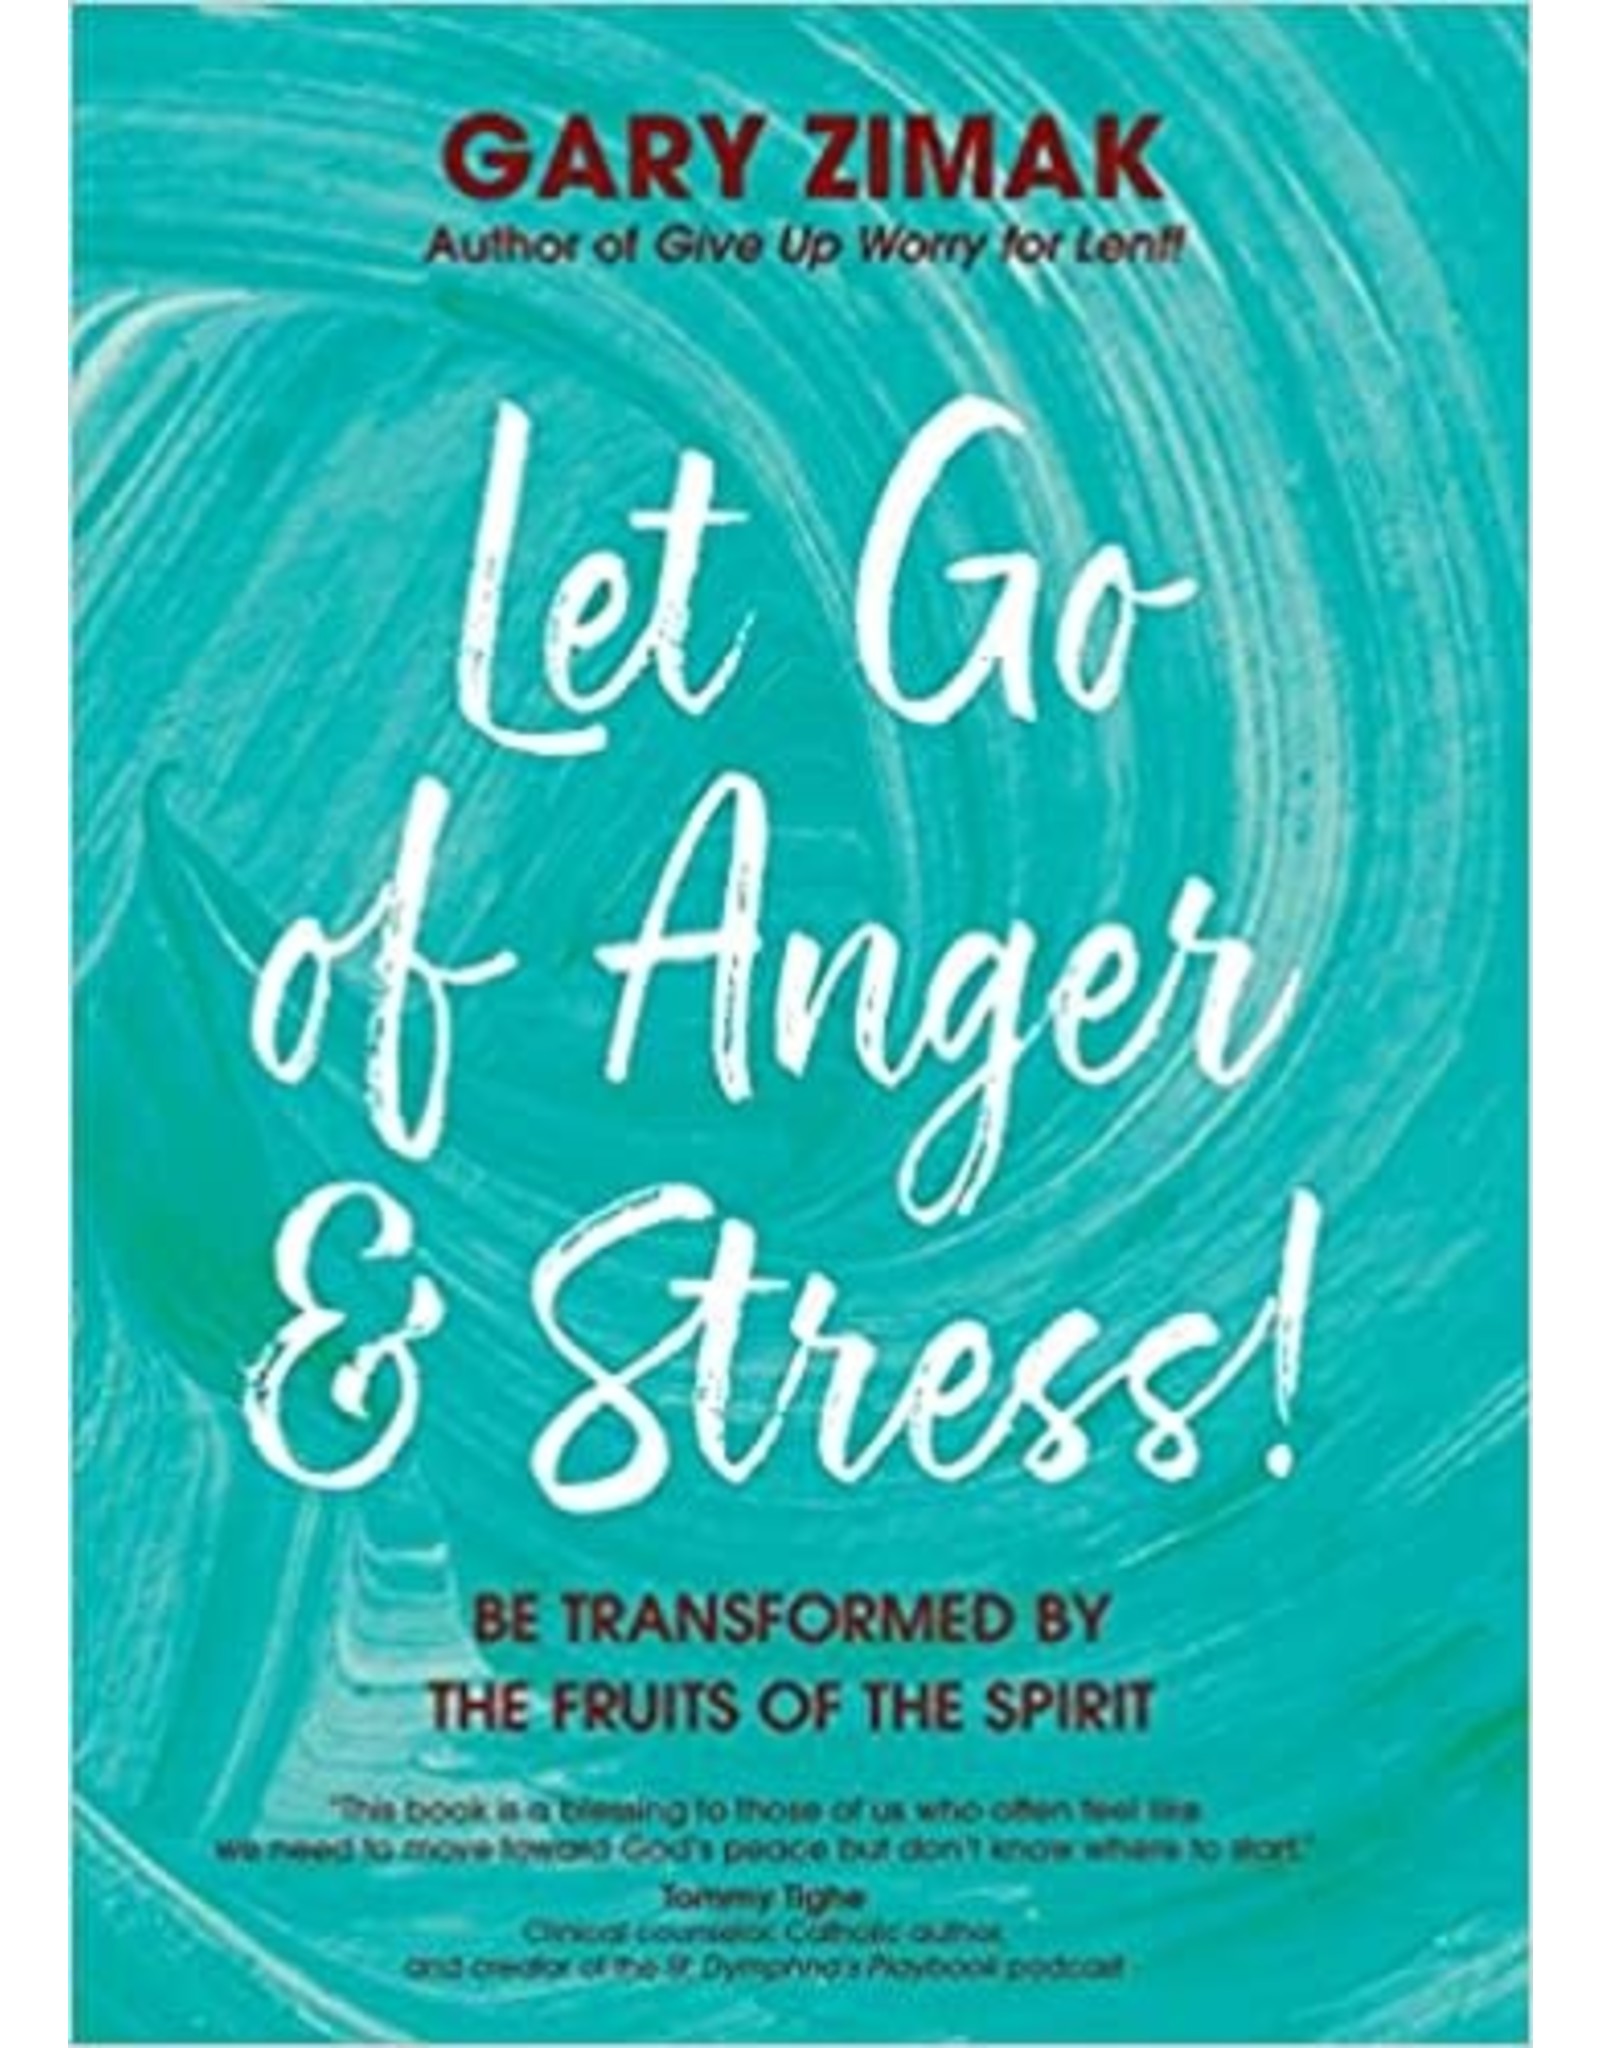 Ave Maria Let Go of Anger and Stress!